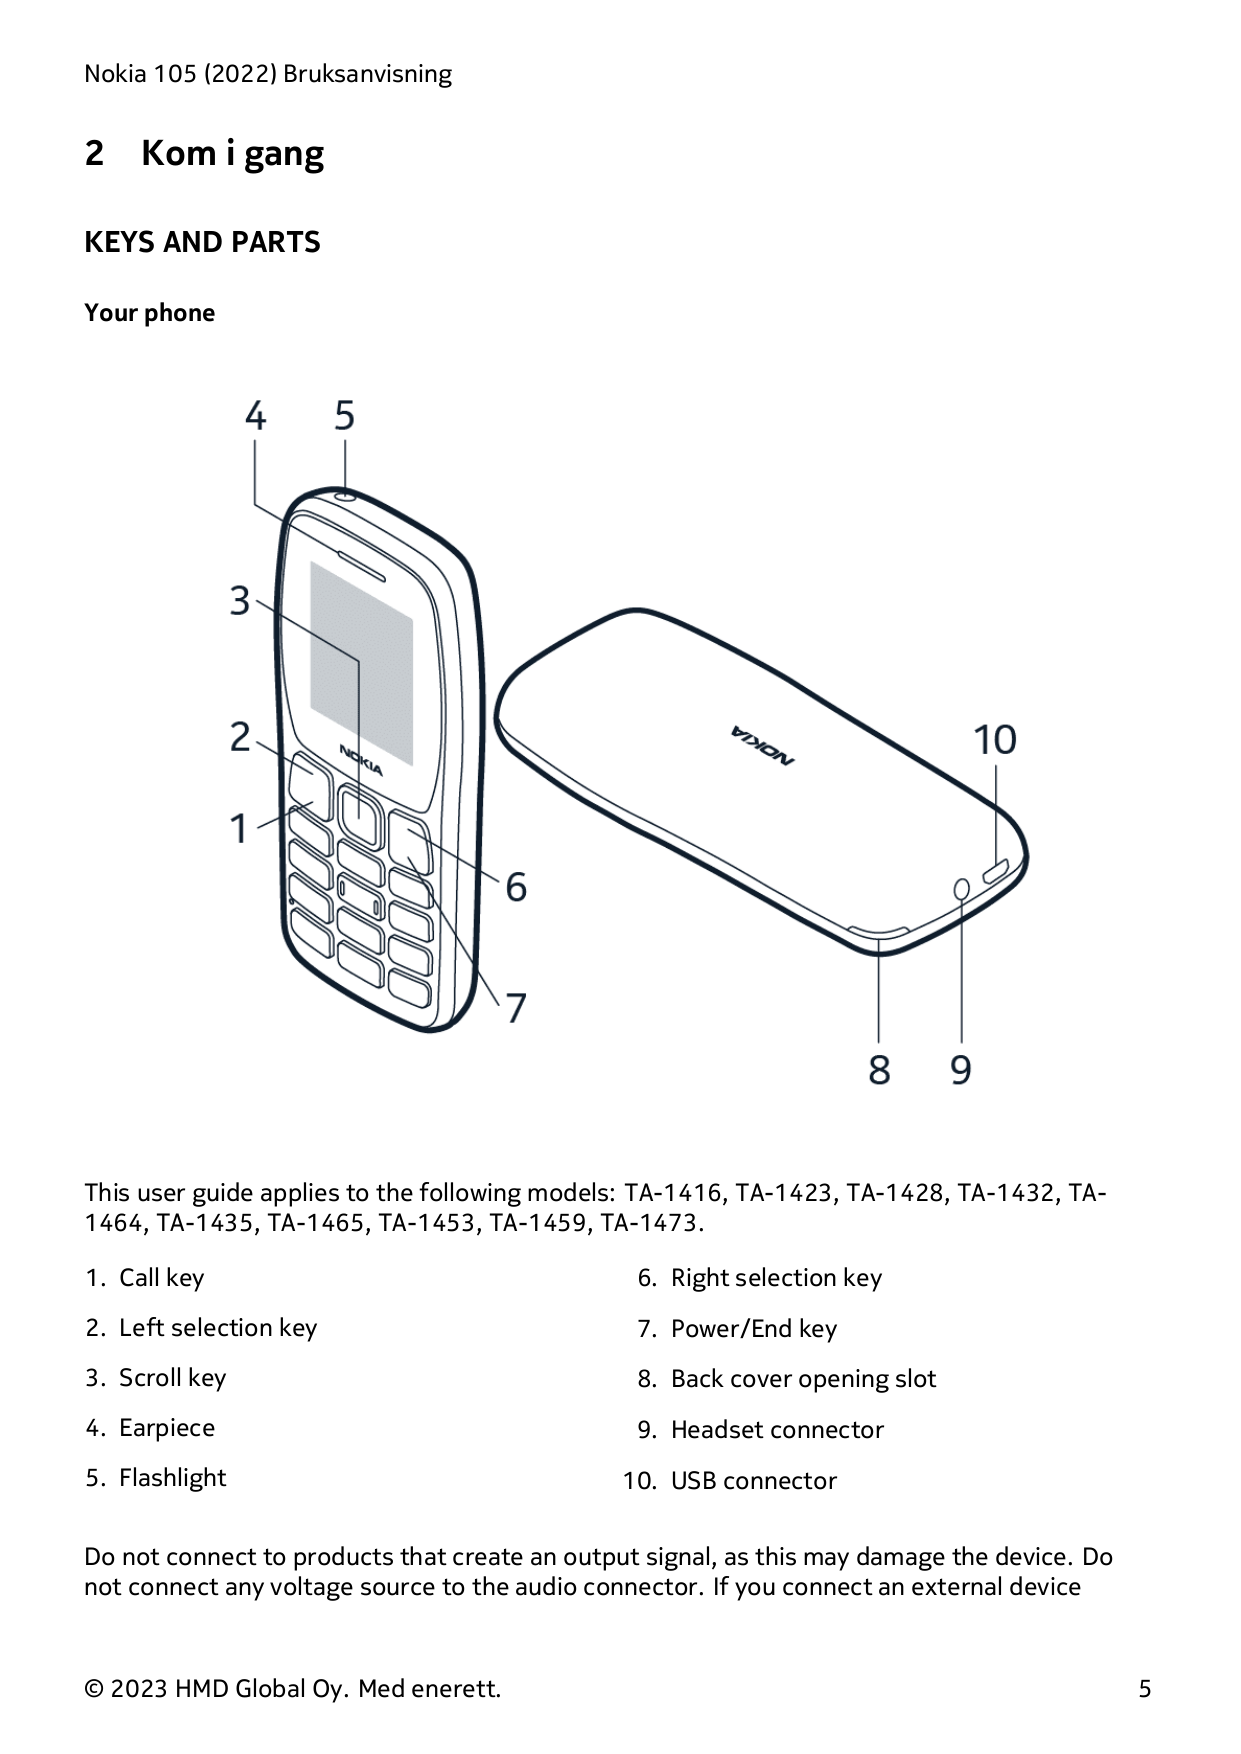 Nokia 105 (2022) Bruksanvisning2Kom i gangKEYS AND PARTSYour phoneThis user guide applies to the following models: TA-1416, TA-1